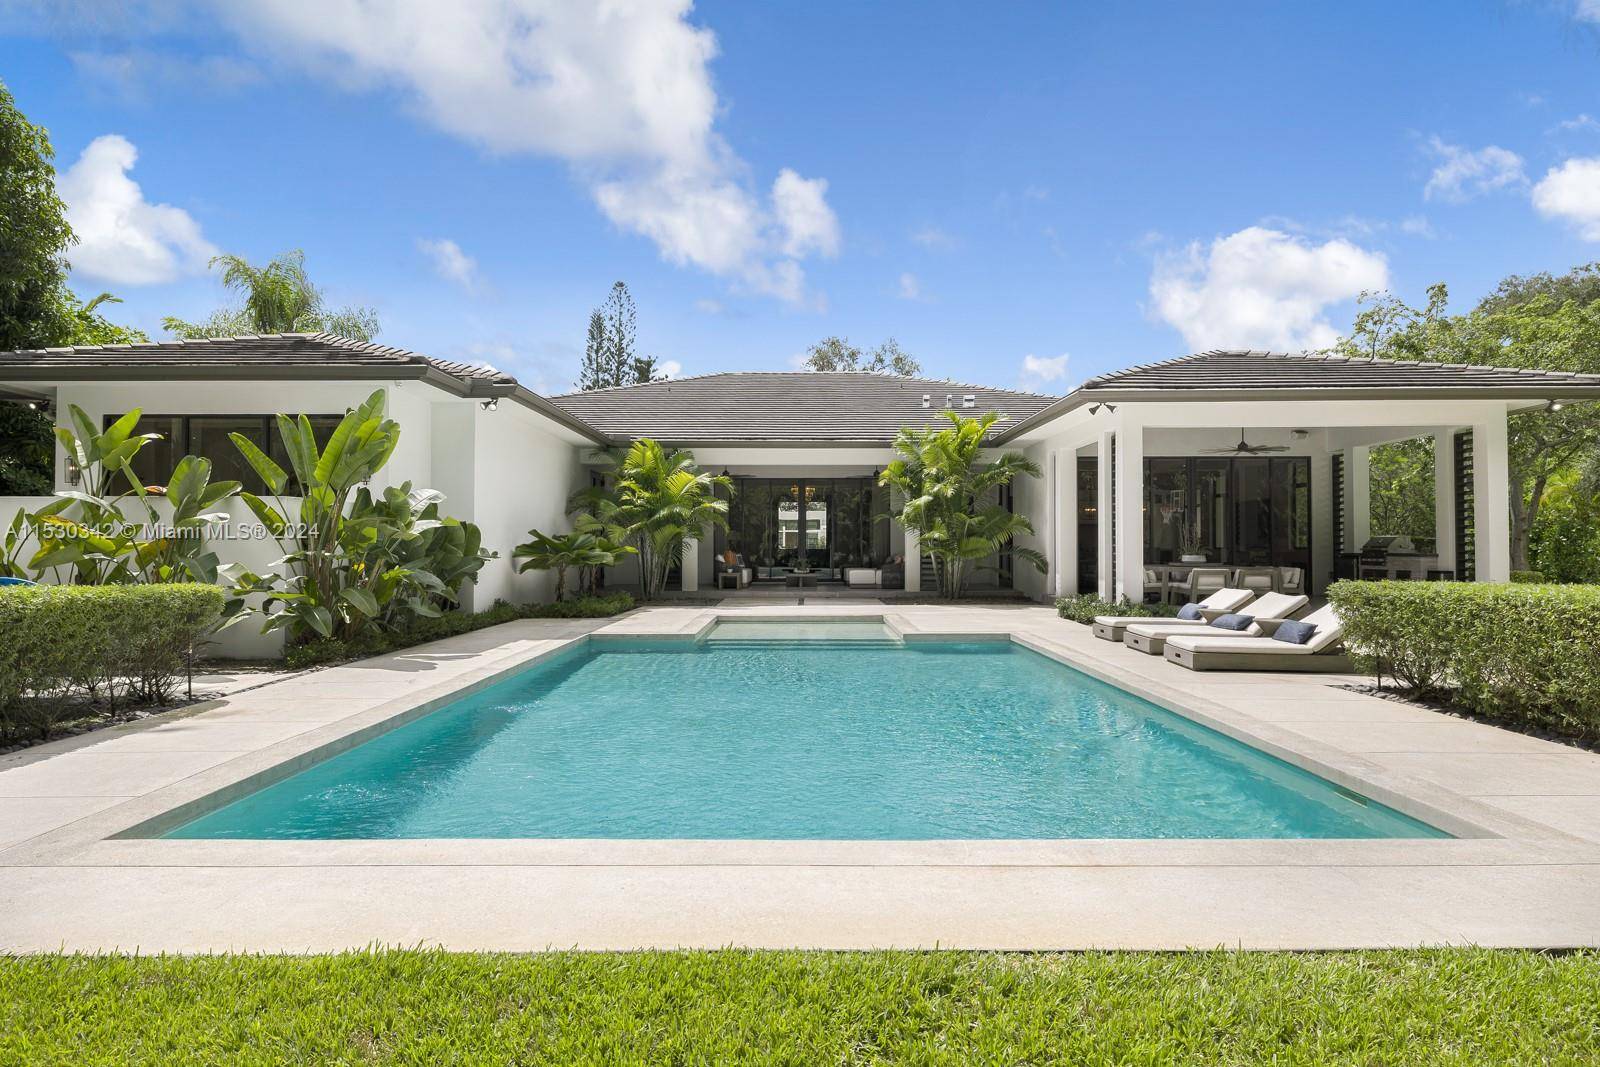 Luxury awaits in this Pinecrest modern estate, custom built in 2020 with state of the art construction and impeccable finishes.